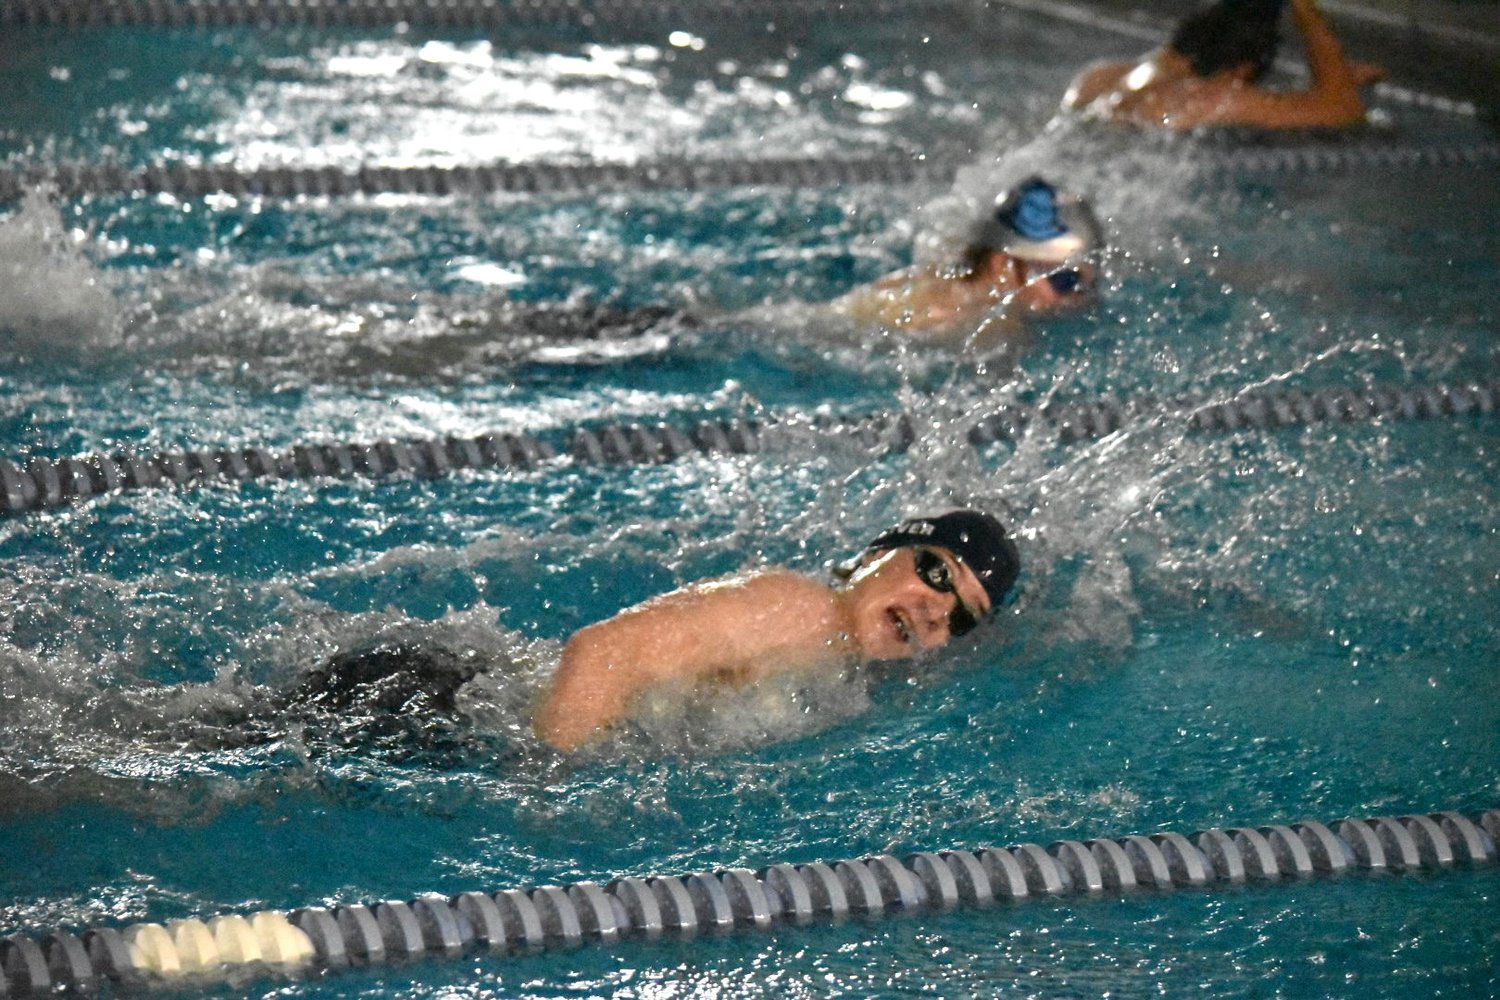 Eli MacIver was part of the Whalers’ winning 200-yard medley relay in 1:40.95 during last Wednesday’s meet against Sandwich.